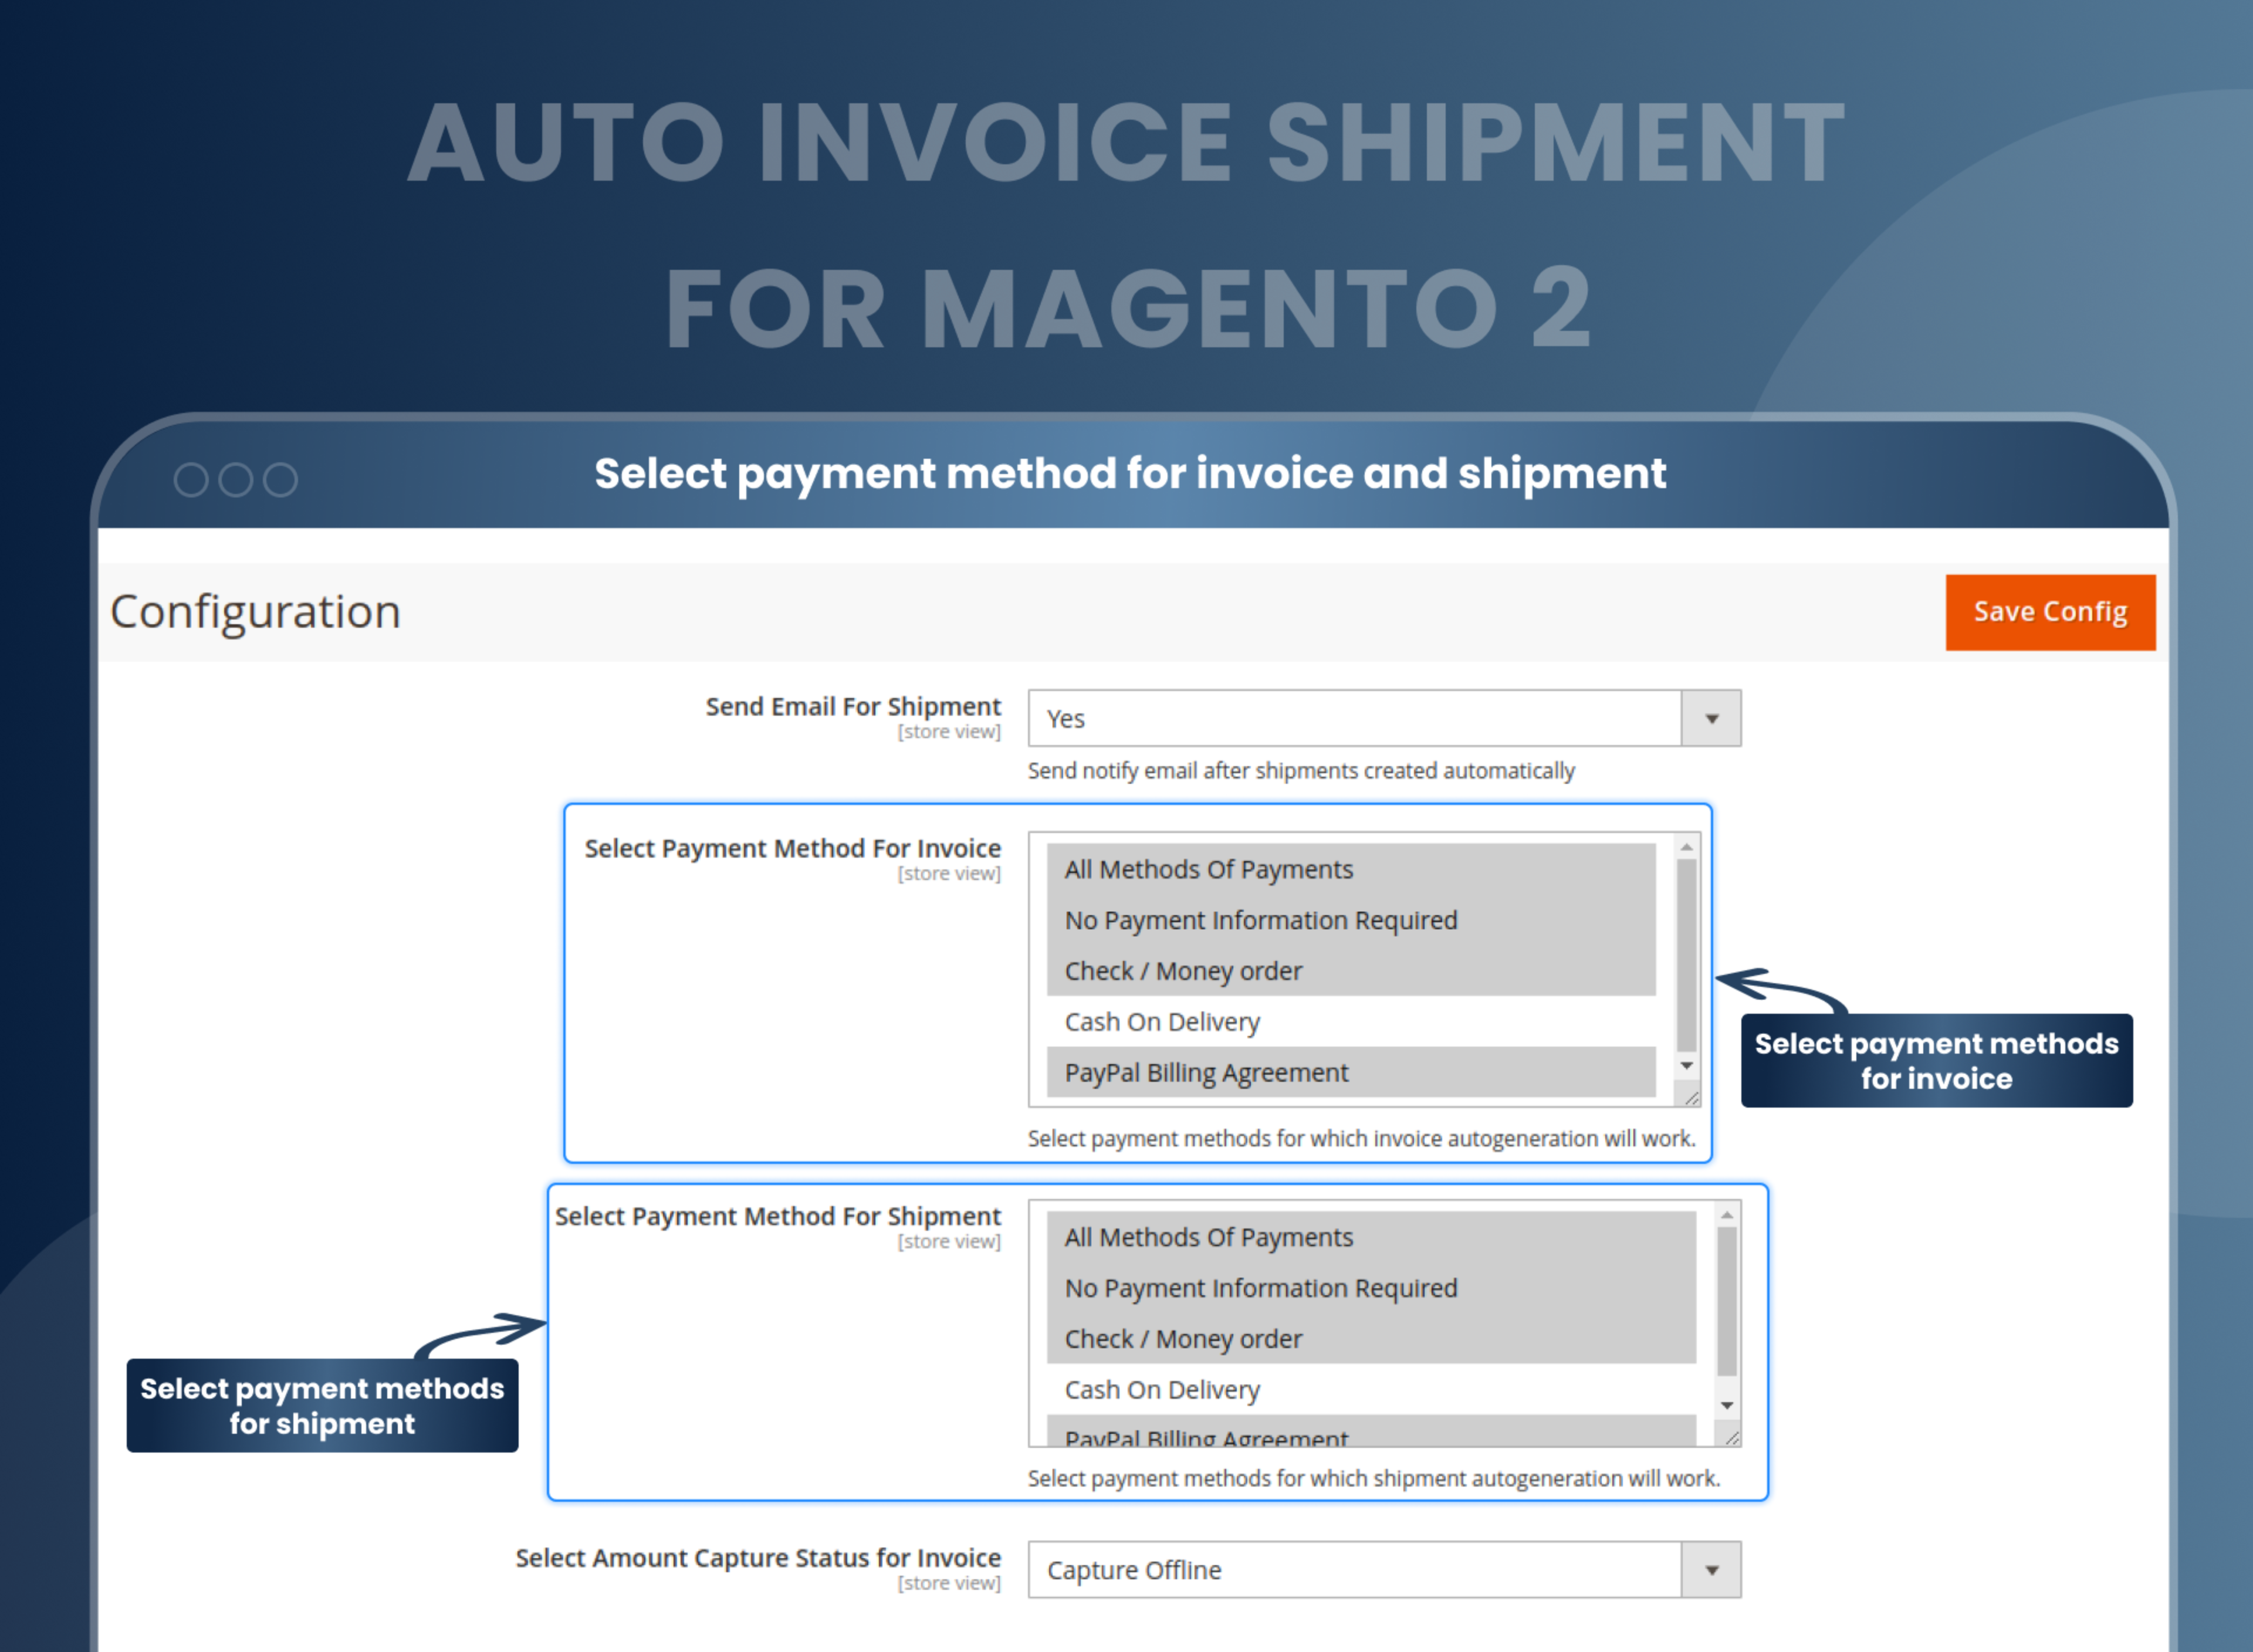 Select payment method for invoice and shipment